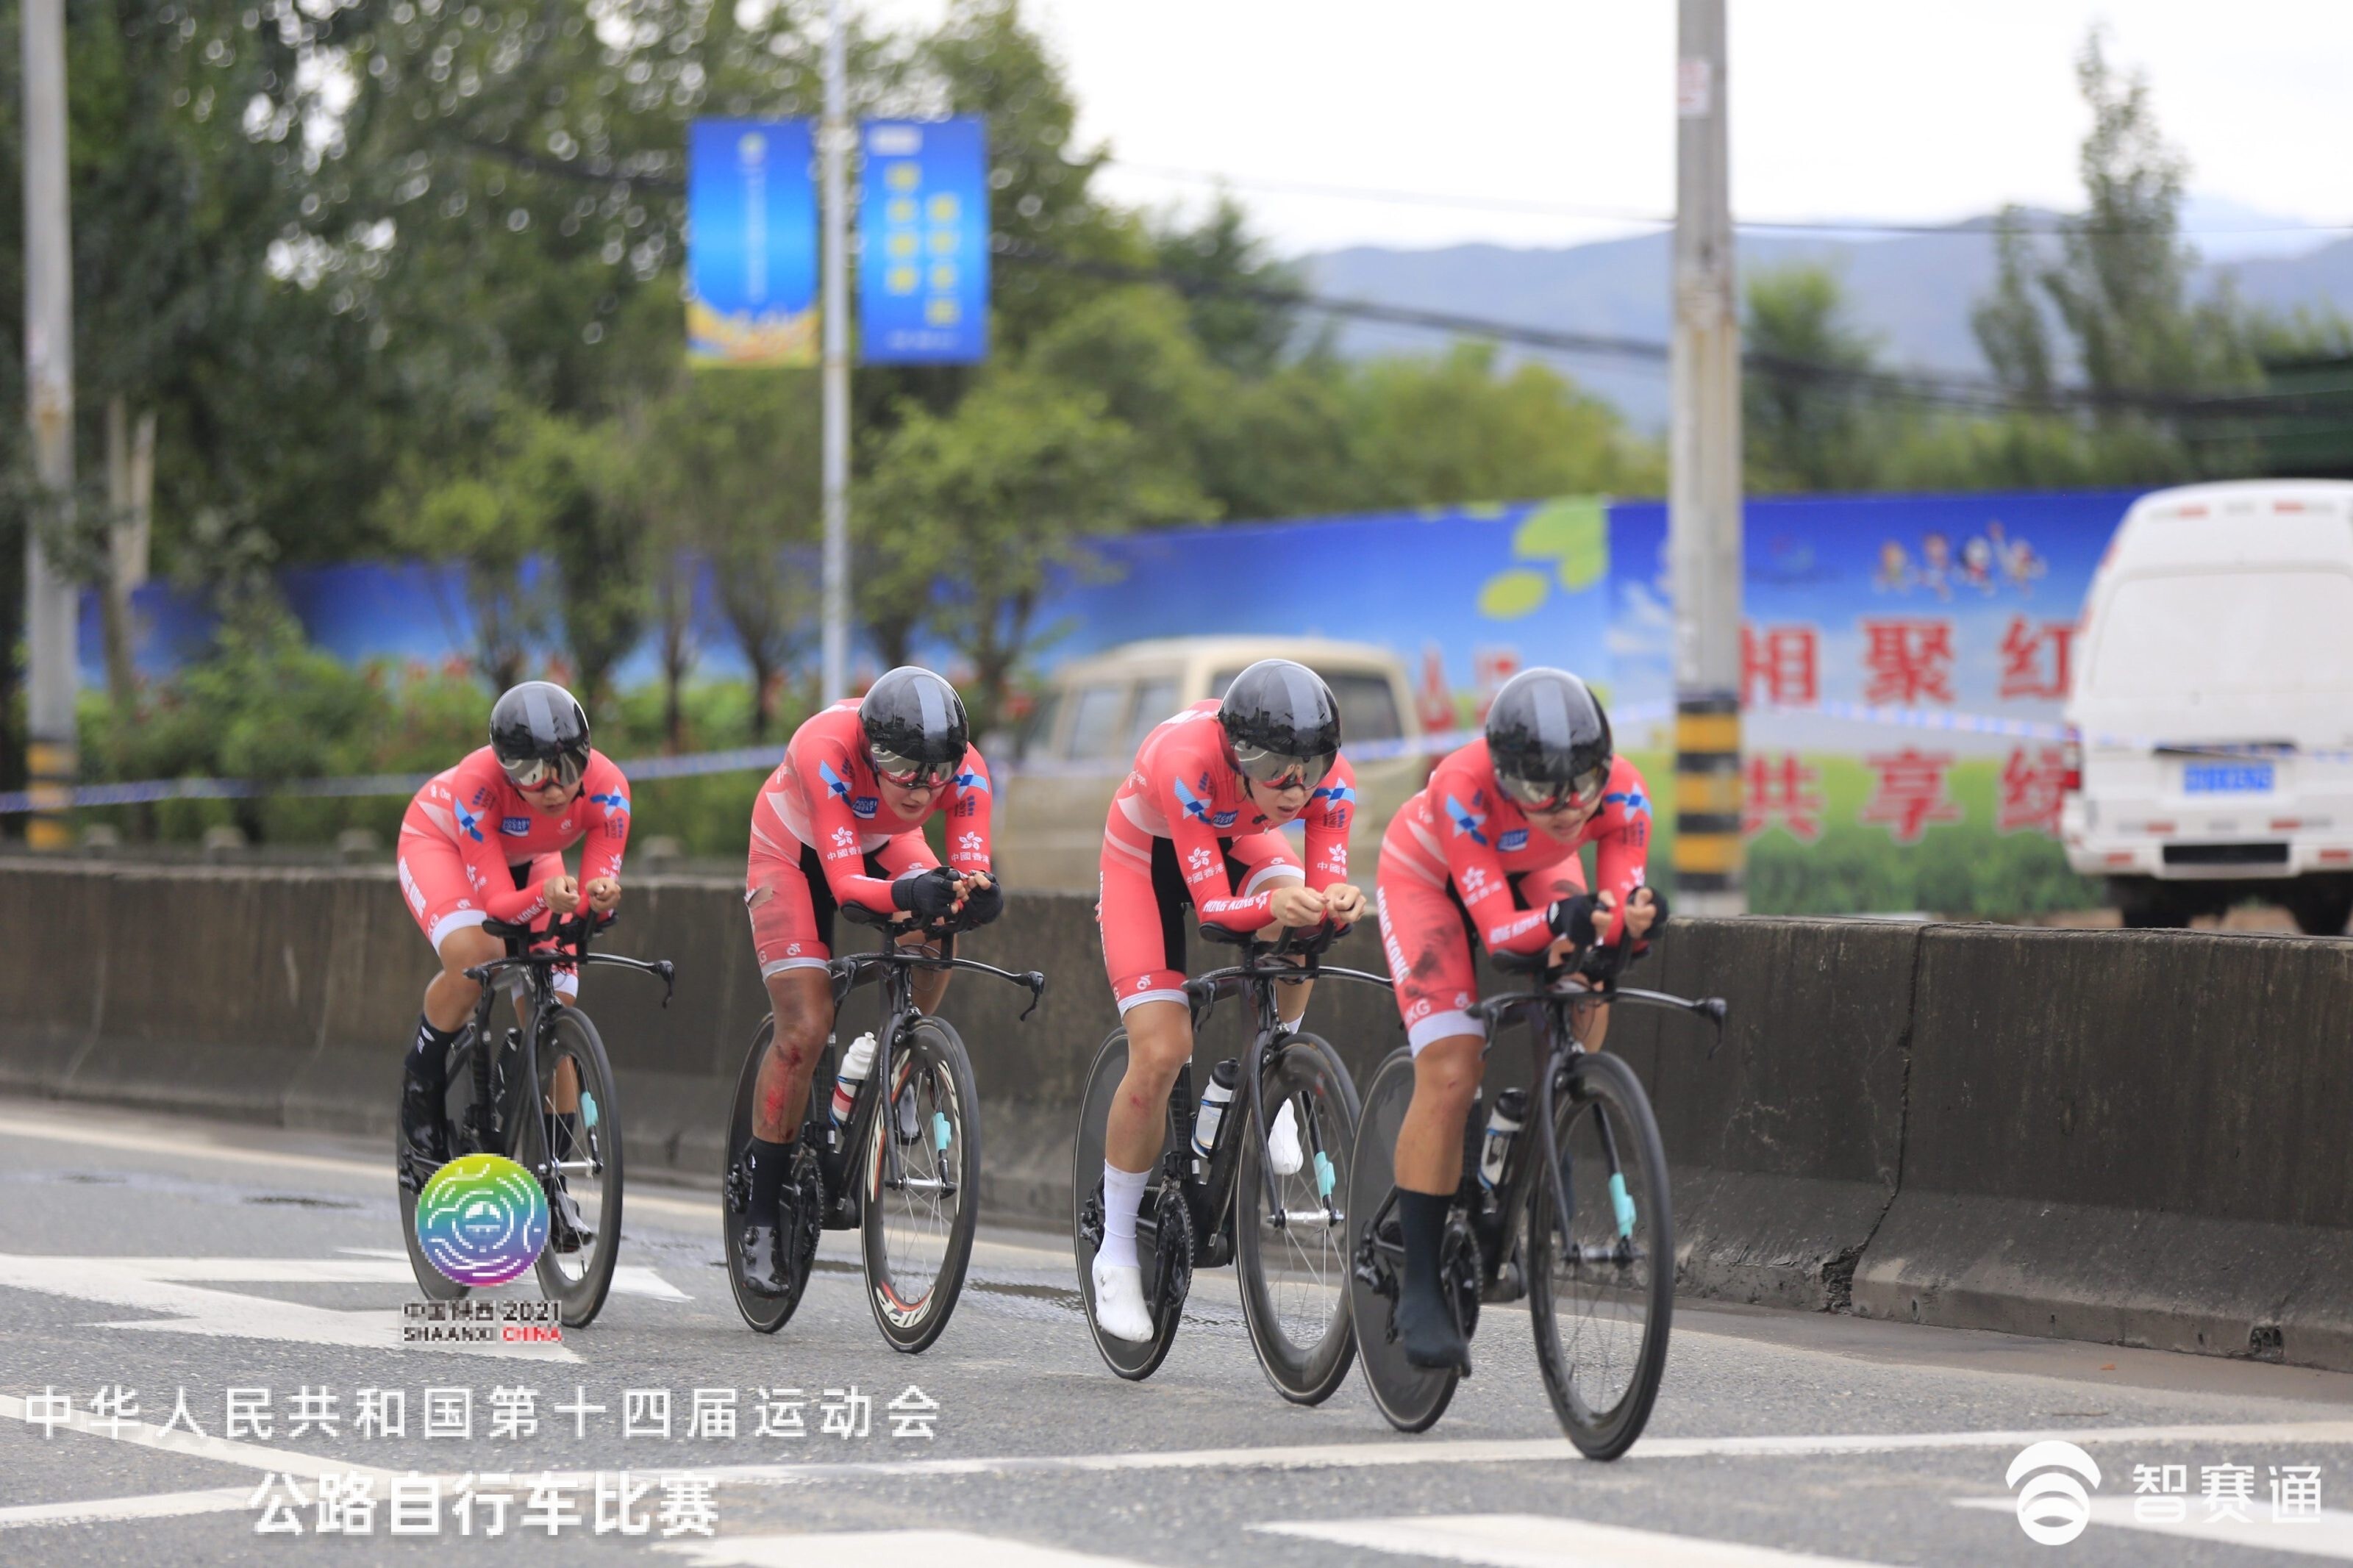 Pang Yao (third) has blood seeping from her leg after a crash in the women's team time trial at the 2021 National Games. Photo: Handout